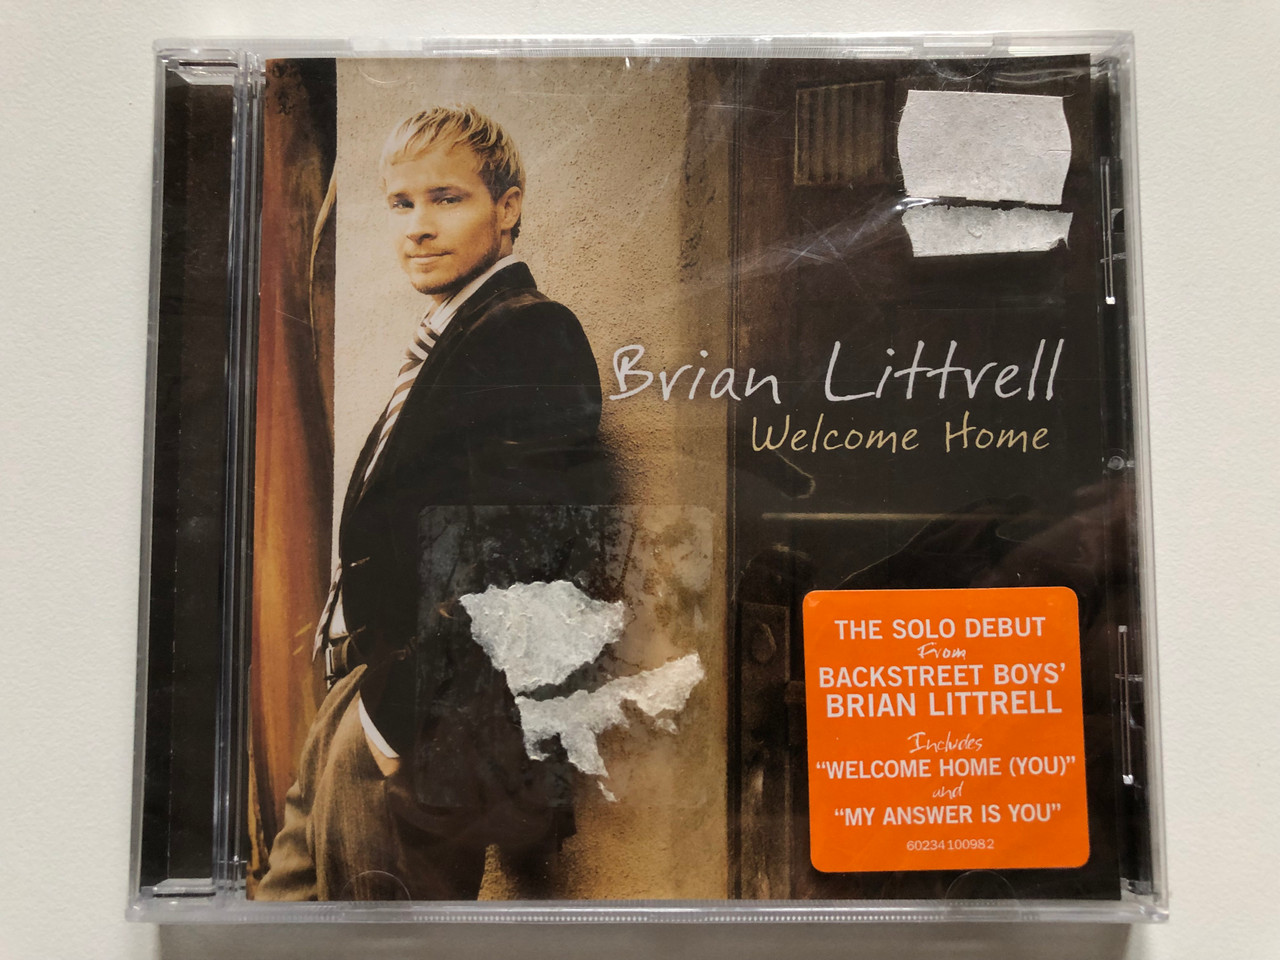 https://cdn10.bigcommerce.com/s-62bdpkt7pb/products/0/images/201876/Brian_Littrell_Welcome_Home_The_Solo_Debut_From_Backstreet_Boys_Brian_Littrell_Includes_Welcome_Home_You_and_My_Answer_Is_You_Reunion_Records_Audio_CD_2006_60234100982_1__73823.1639652278.1280.1280.JPG?c=2&_gl=1*4ttyb0*_ga*MjA2NTIxMjE2MC4xNTkwNTEyNTMy*_ga_WS2VZYPC6G*MTYzOTY0NjQ1OC4yMTkuMS4xNjM5NjUyMDc0LjUx